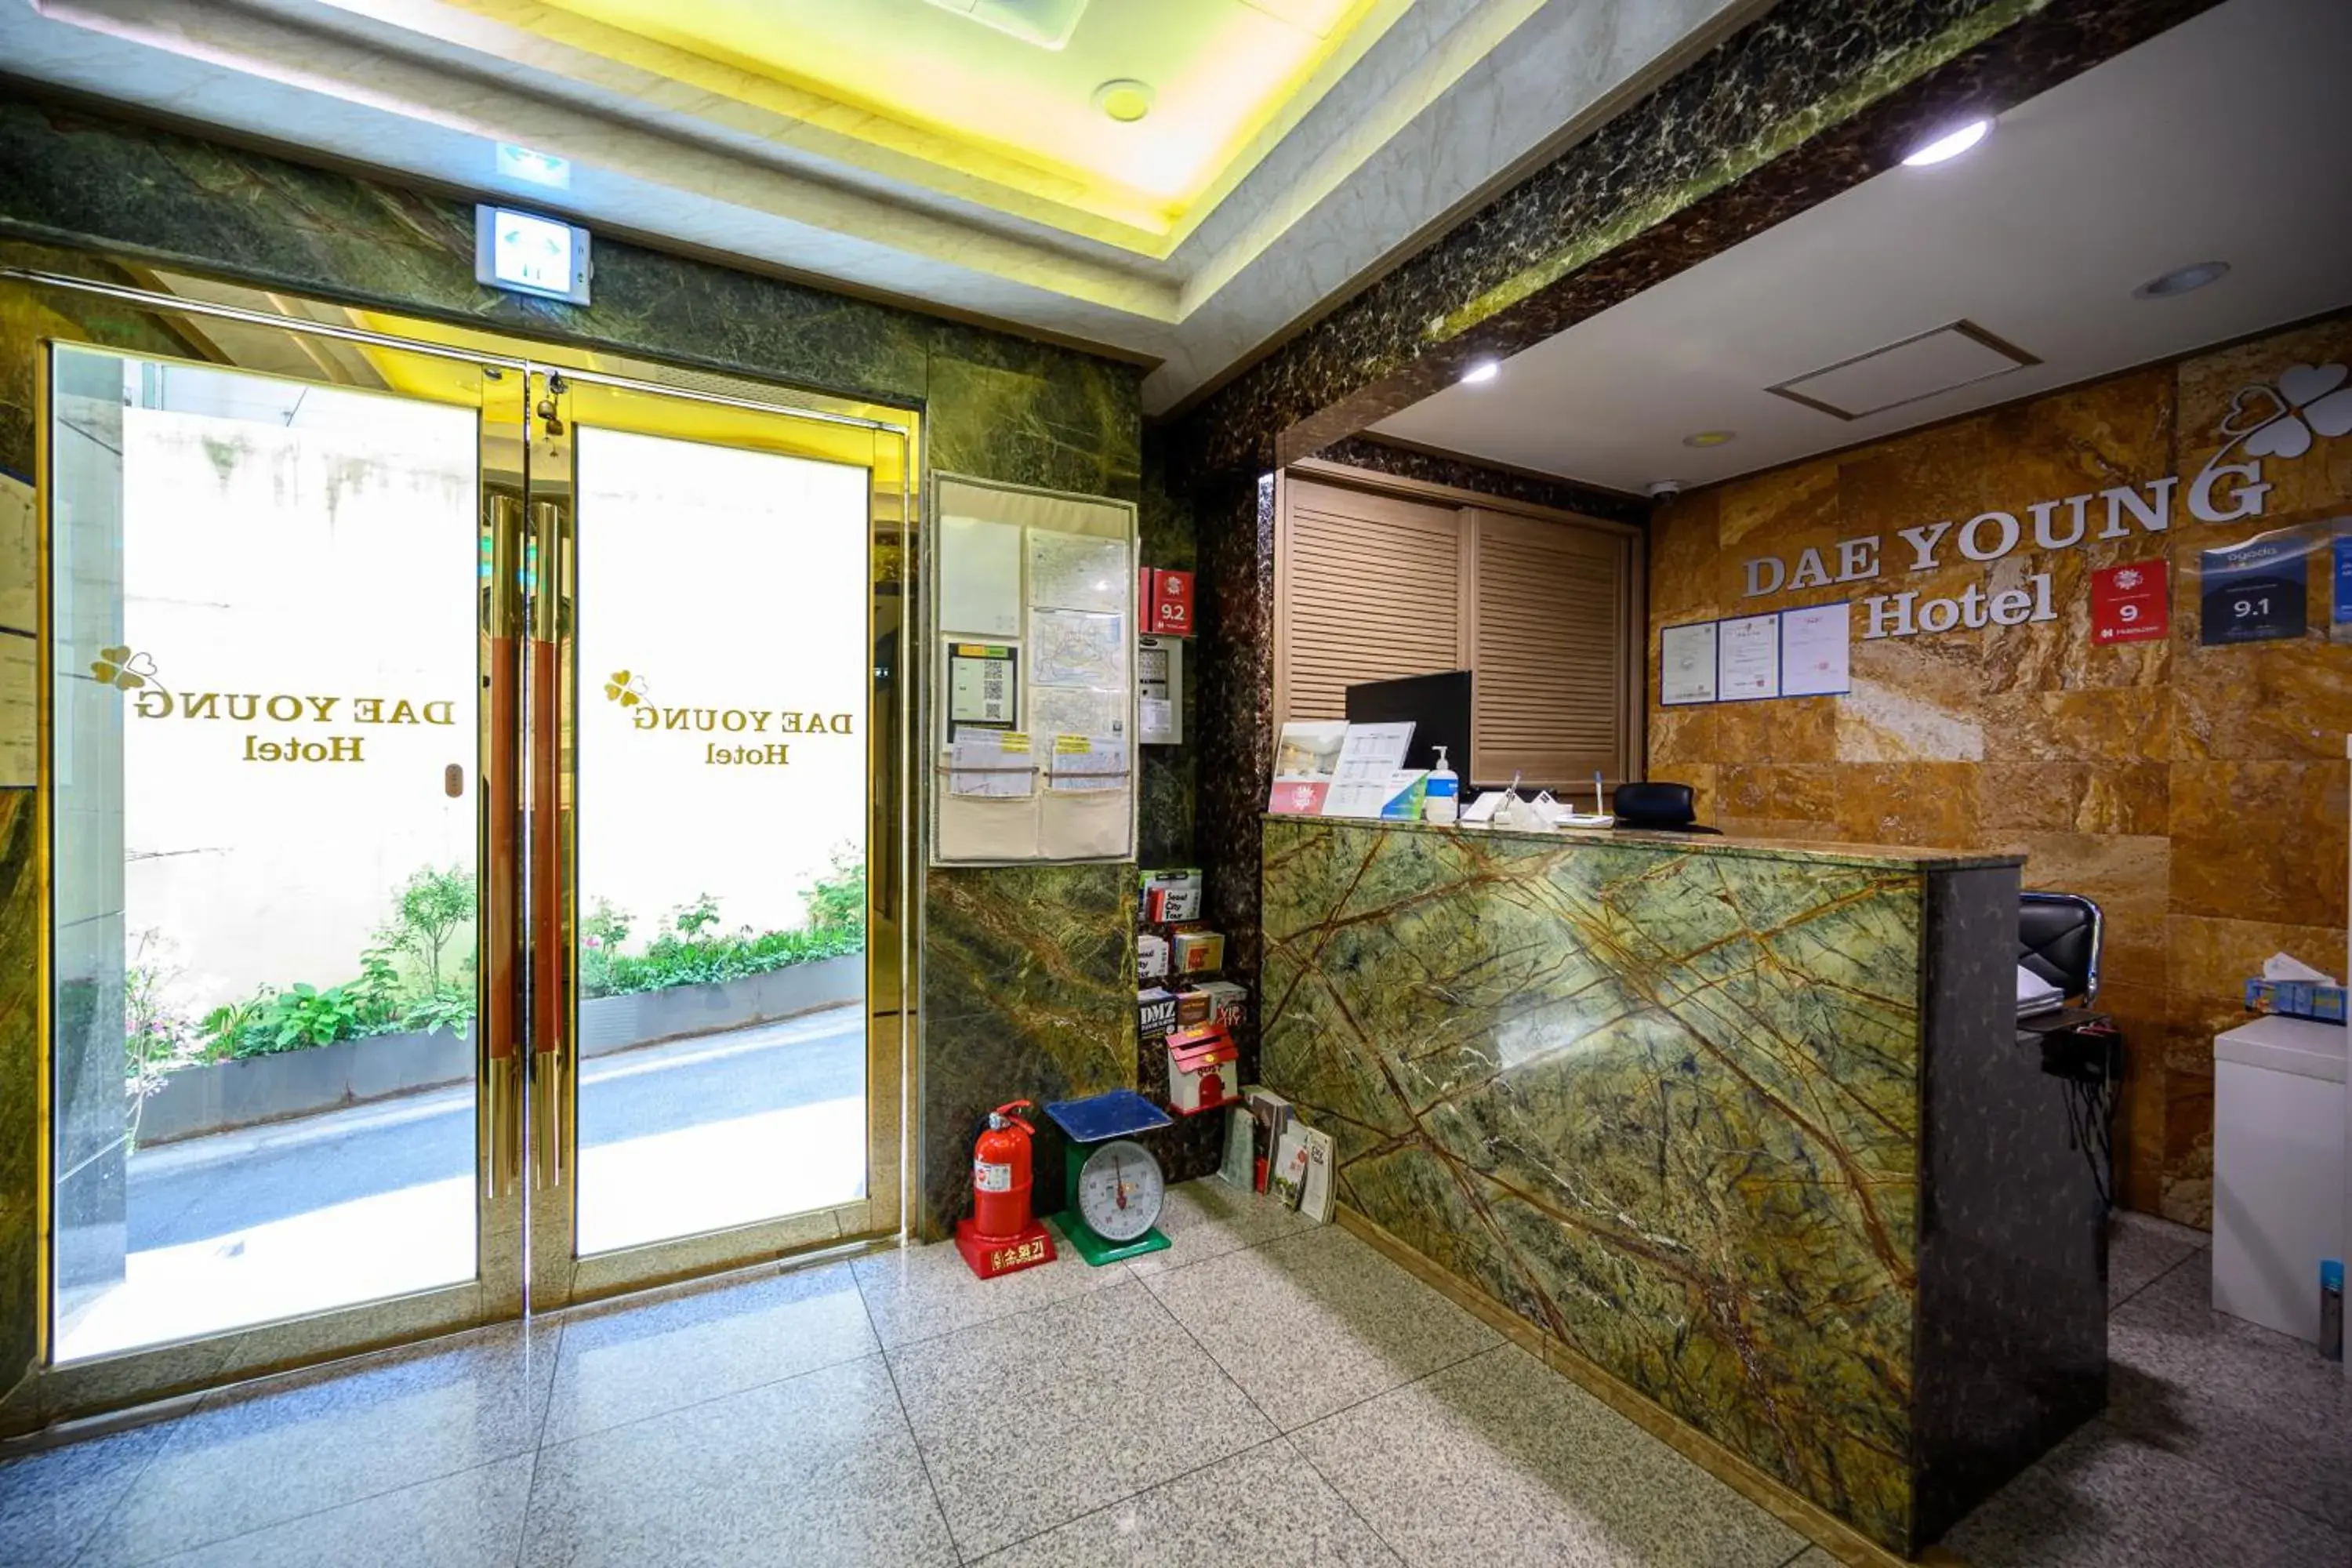 Lobby or reception in Daeyoung Hotel Myeongdong